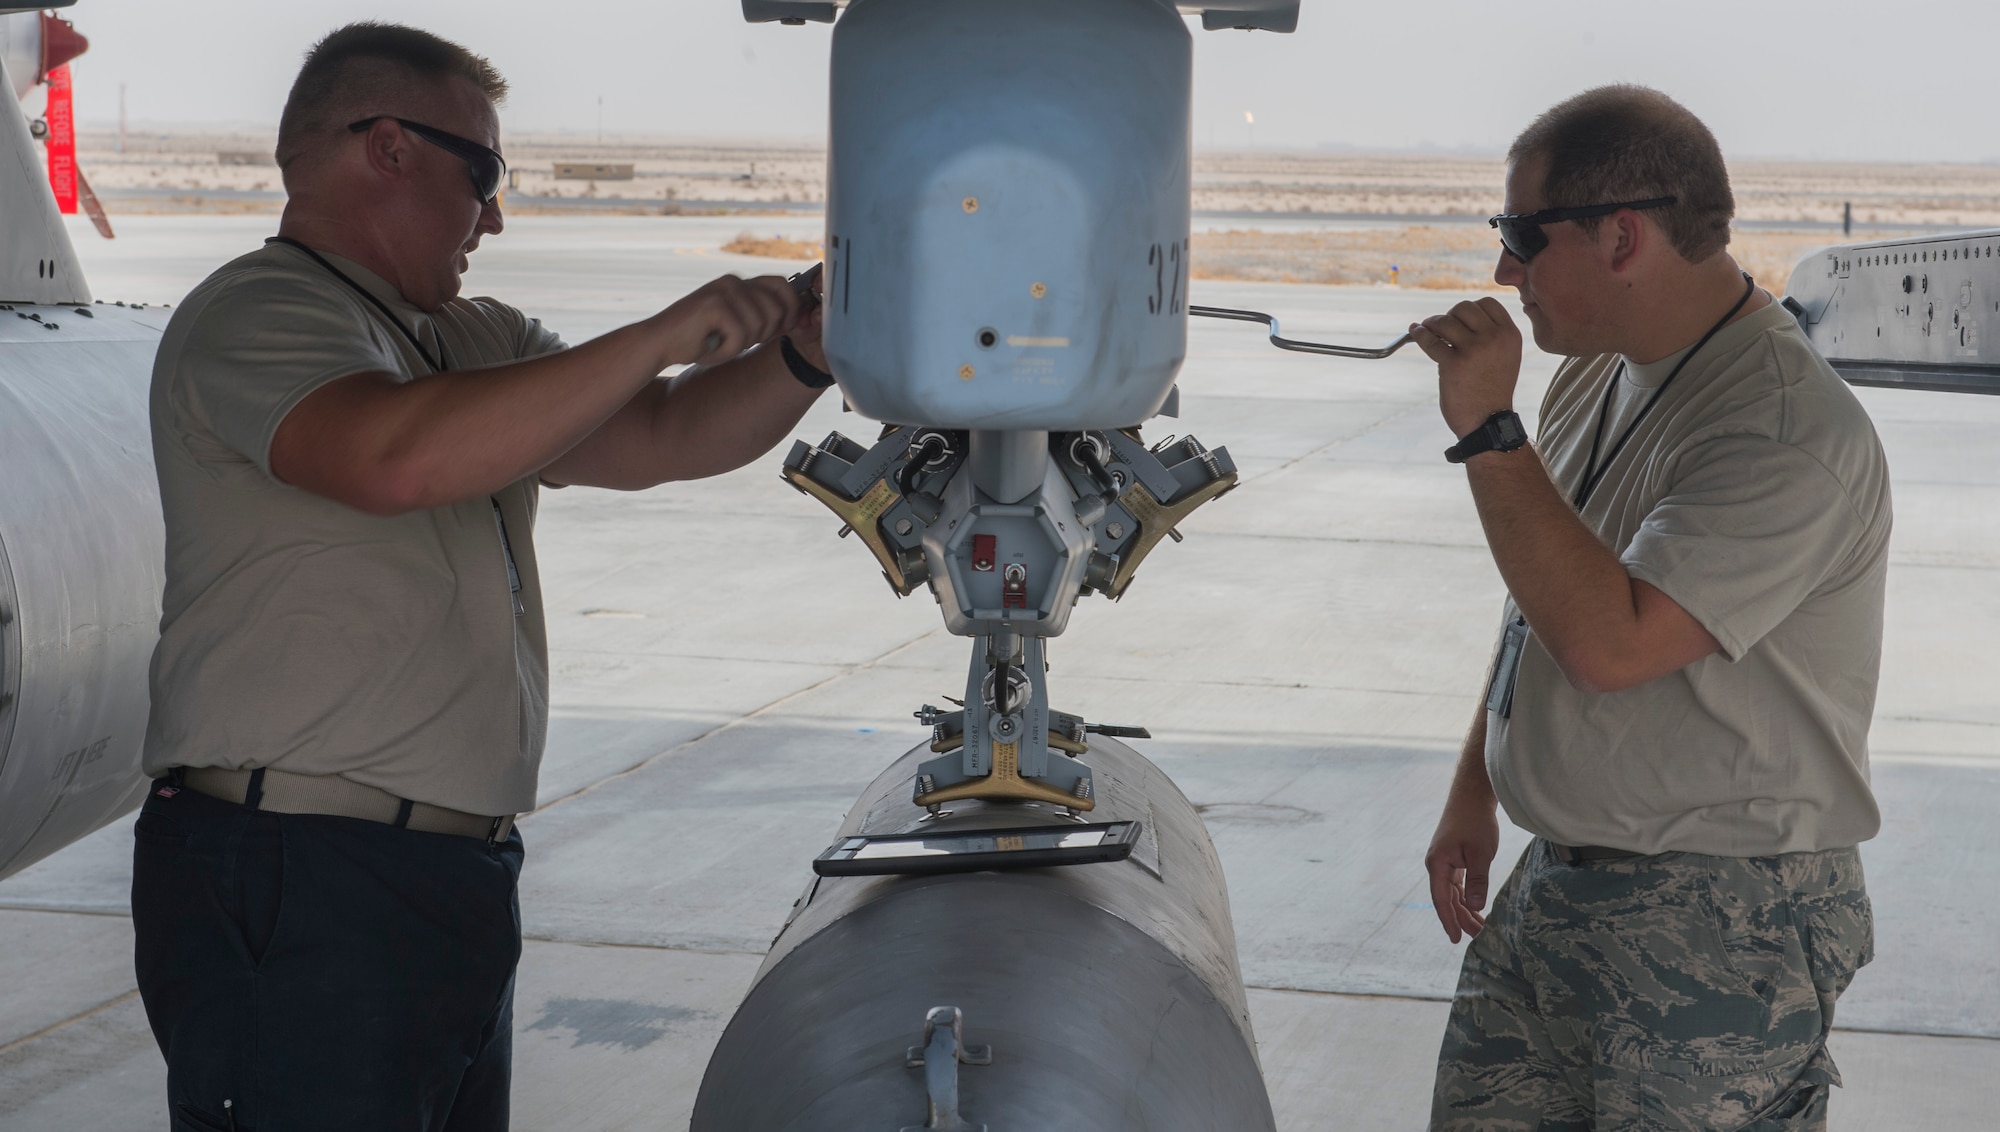 U.S. Air Force Tech. Sgt. J.C. Baxley (left) and Senior Airman Logan Hanea, 100th Fighter Squadron crew chiefs, remove the travel pod from an F-16 Fighting Falcon at the 407th Air Expeditionary Group in Southwest Asia, Oct. 18, 2017. Travel pods are repurposed fuel tanks converted for pilot cargo storage during long flights, typically cross country or deployments. (U.S. Air Force photo by Staff Sgt. Sean Martin/Released)